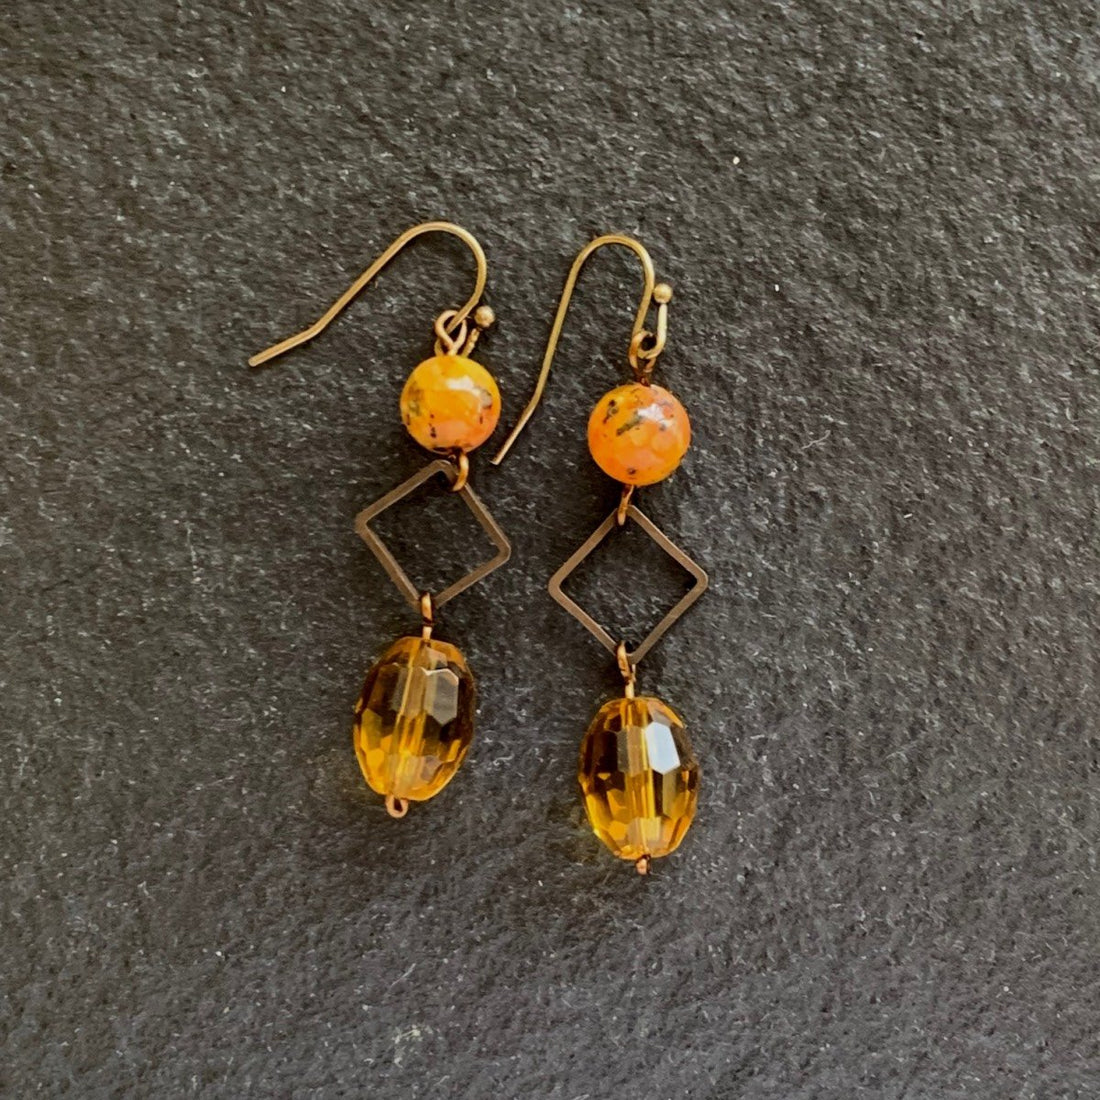 Earrings made of Orange fancy jasper with square bronze accents & gold crystals